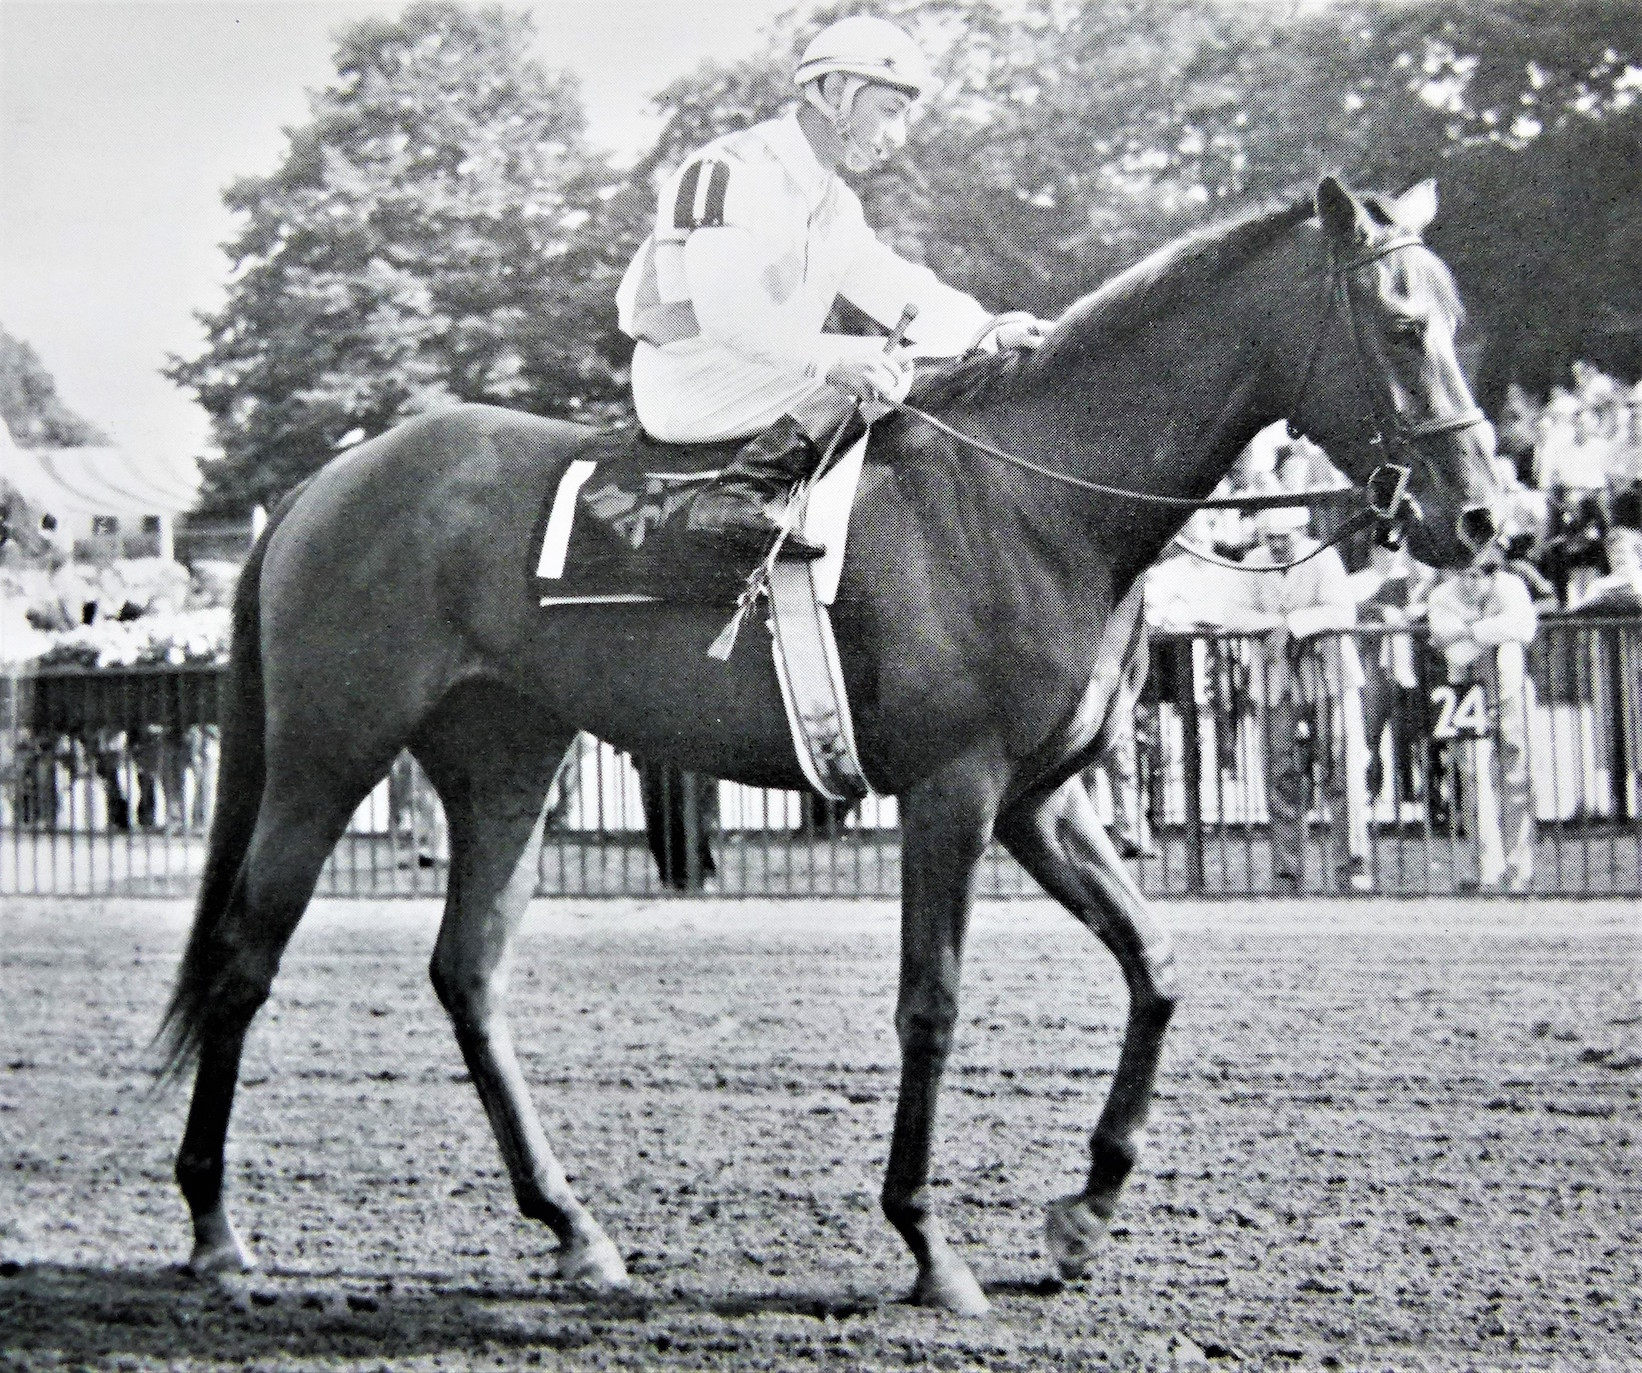 Bowl Of Flowers and Eddie Arcaro, who rode the filly in most of her races